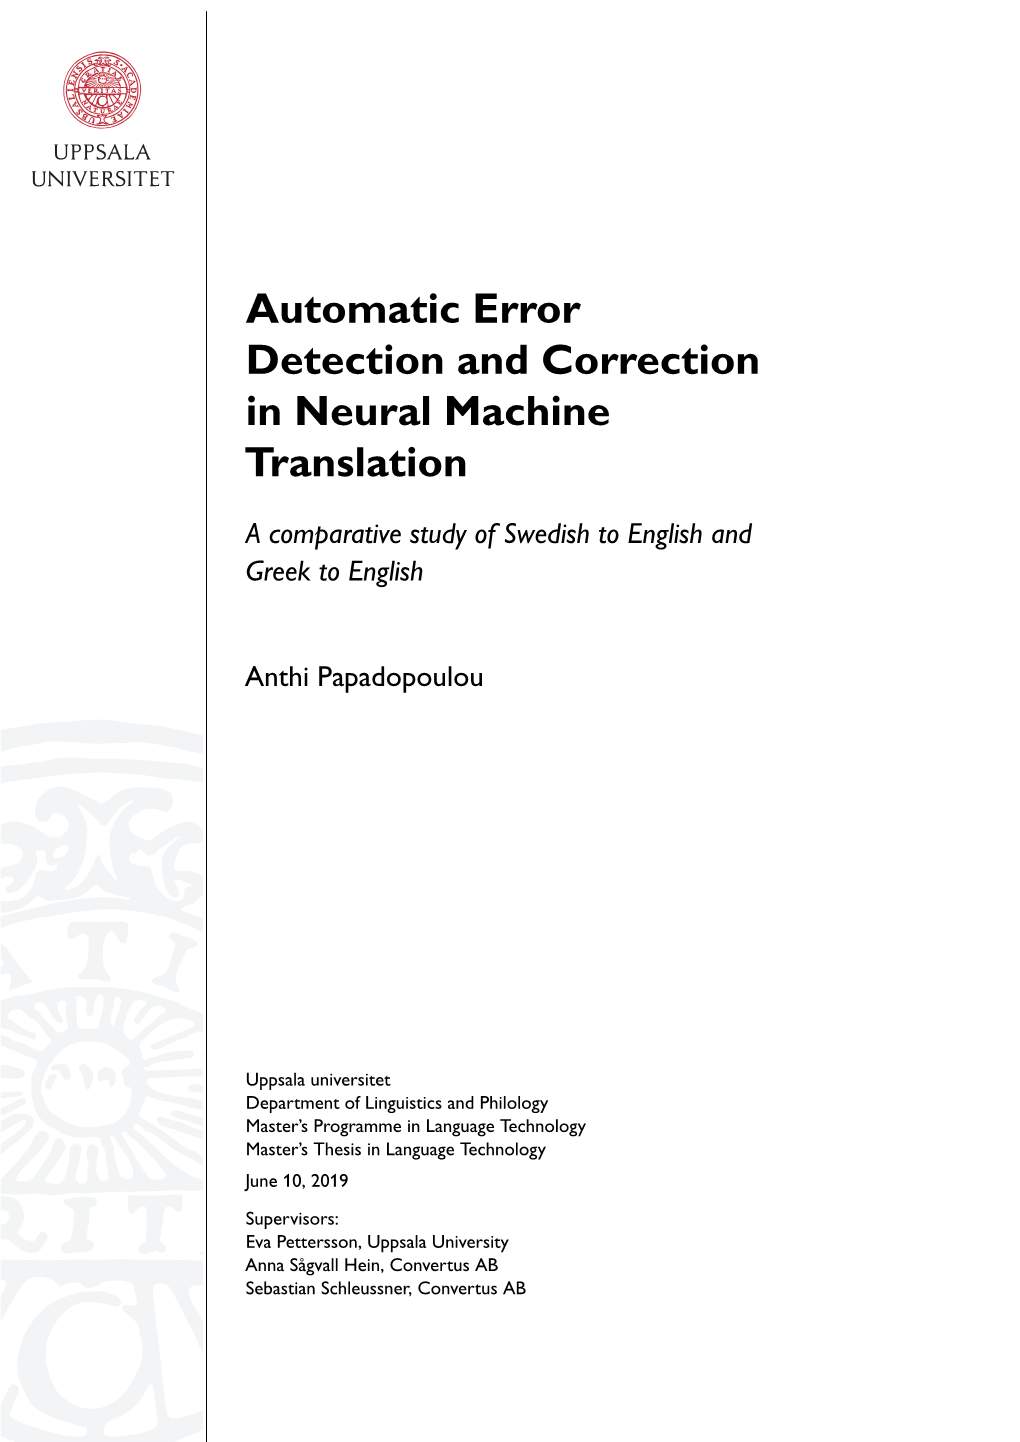 Automatic Error Detection and Correction in Neural Machine Translation